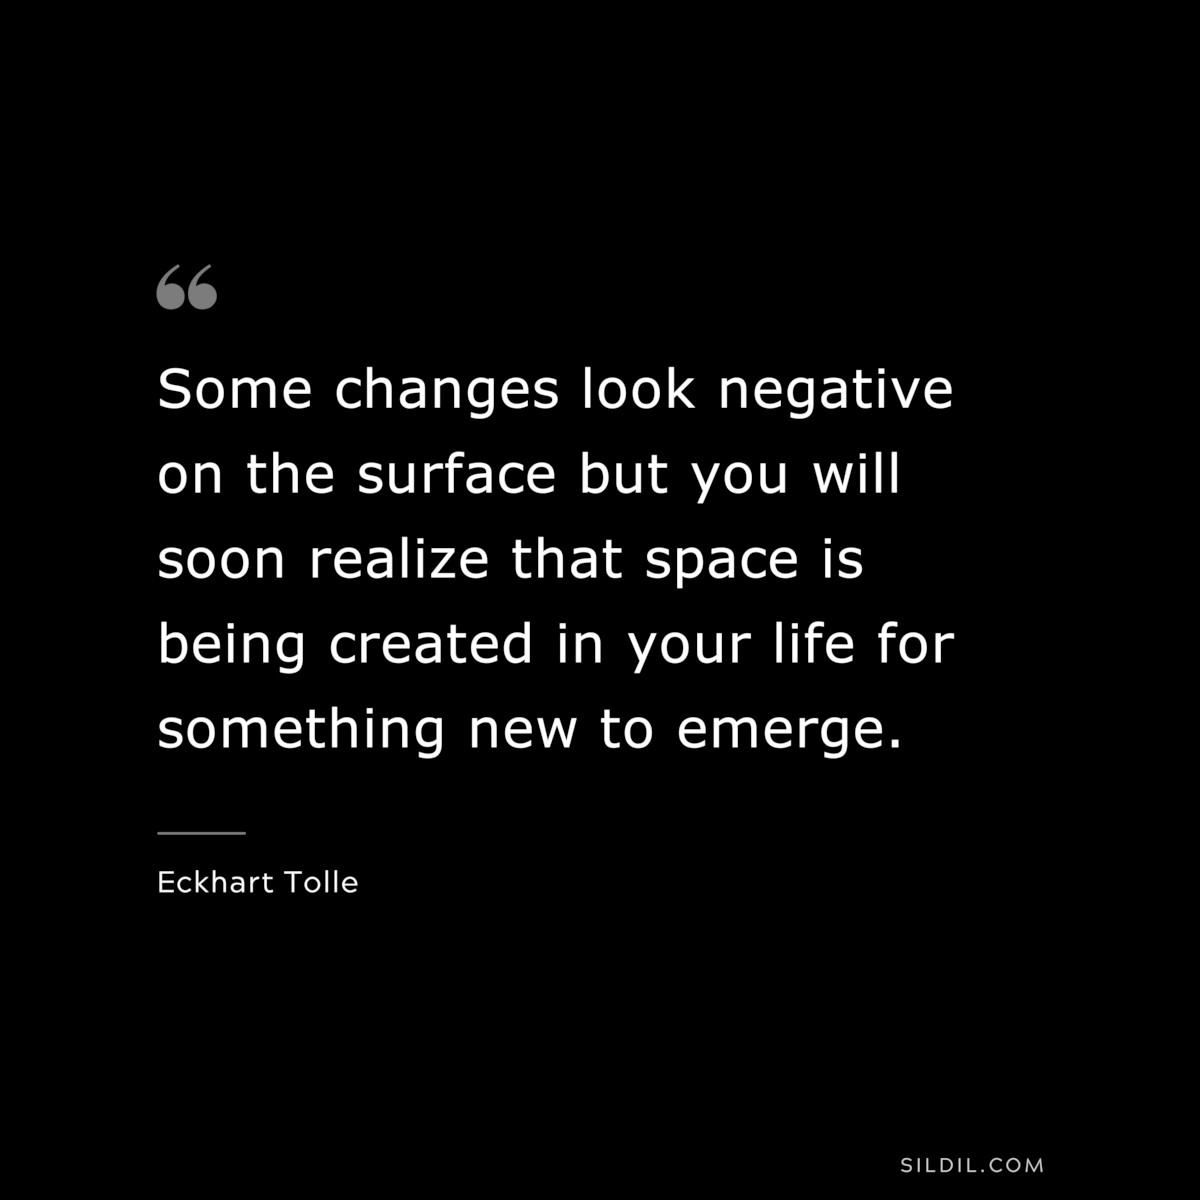 Some changes look negative on the surface but you will soon realize that space is being created in your life for something new to emerge. ― Eckhart Tolle